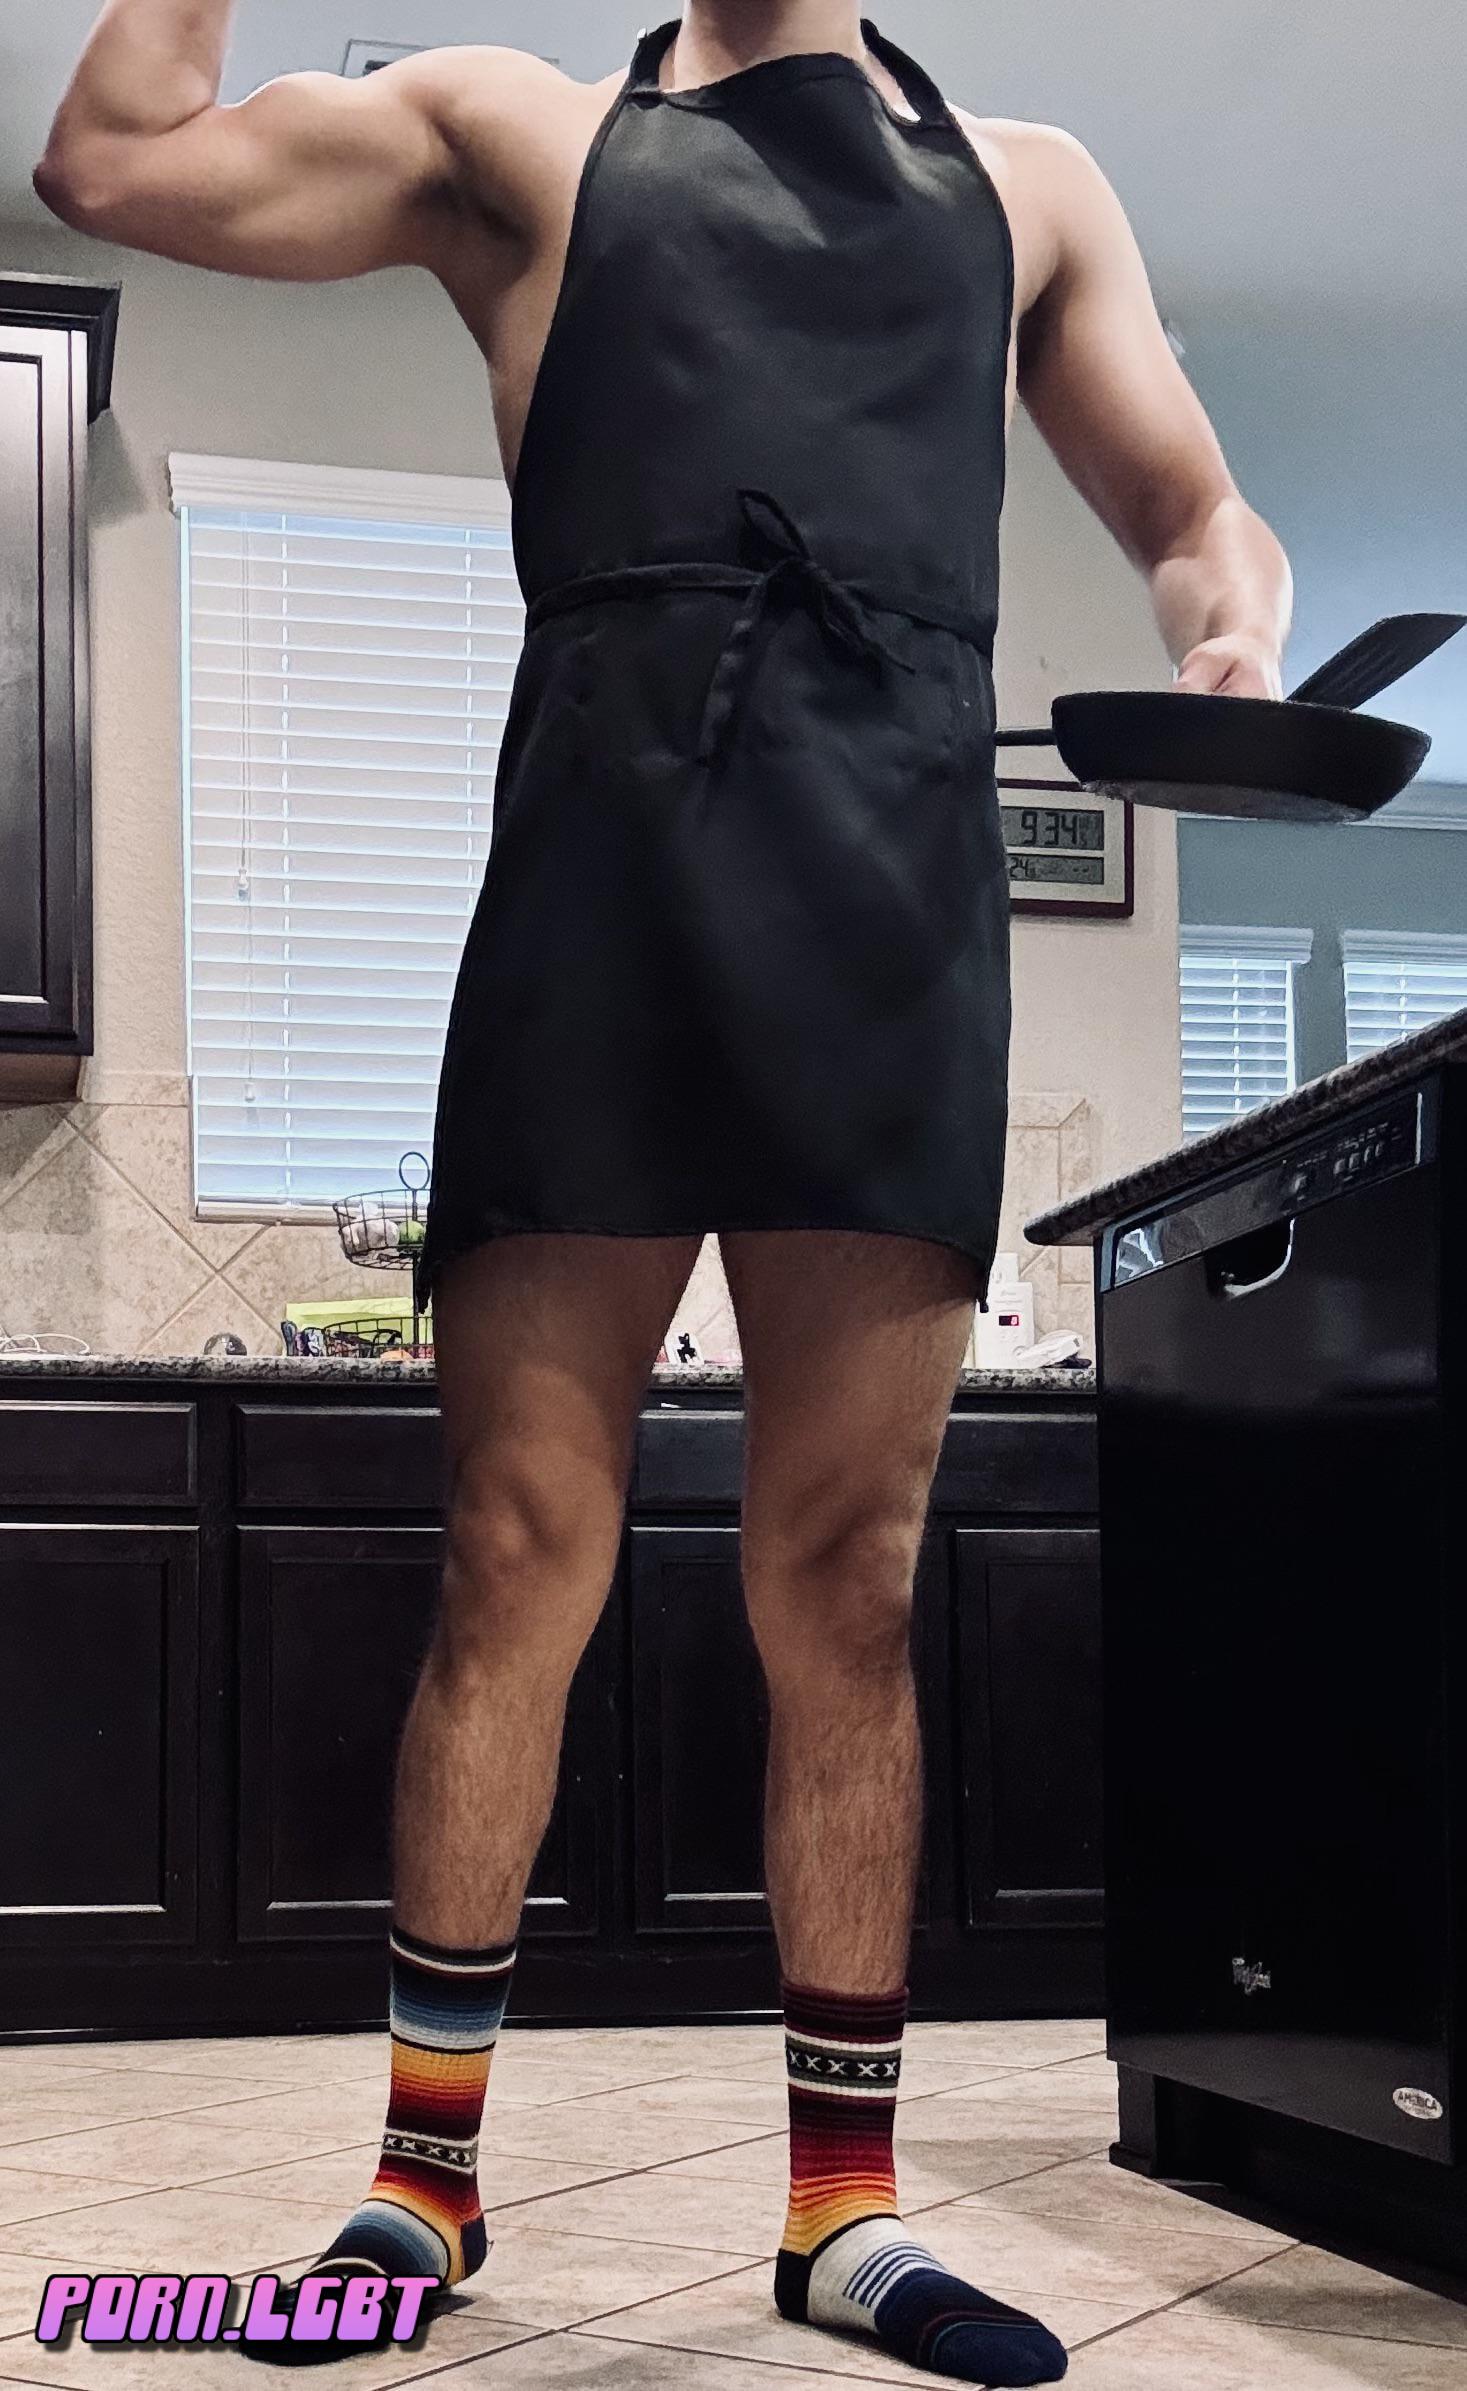 Daddy aka my friend made lunch after he fucked the